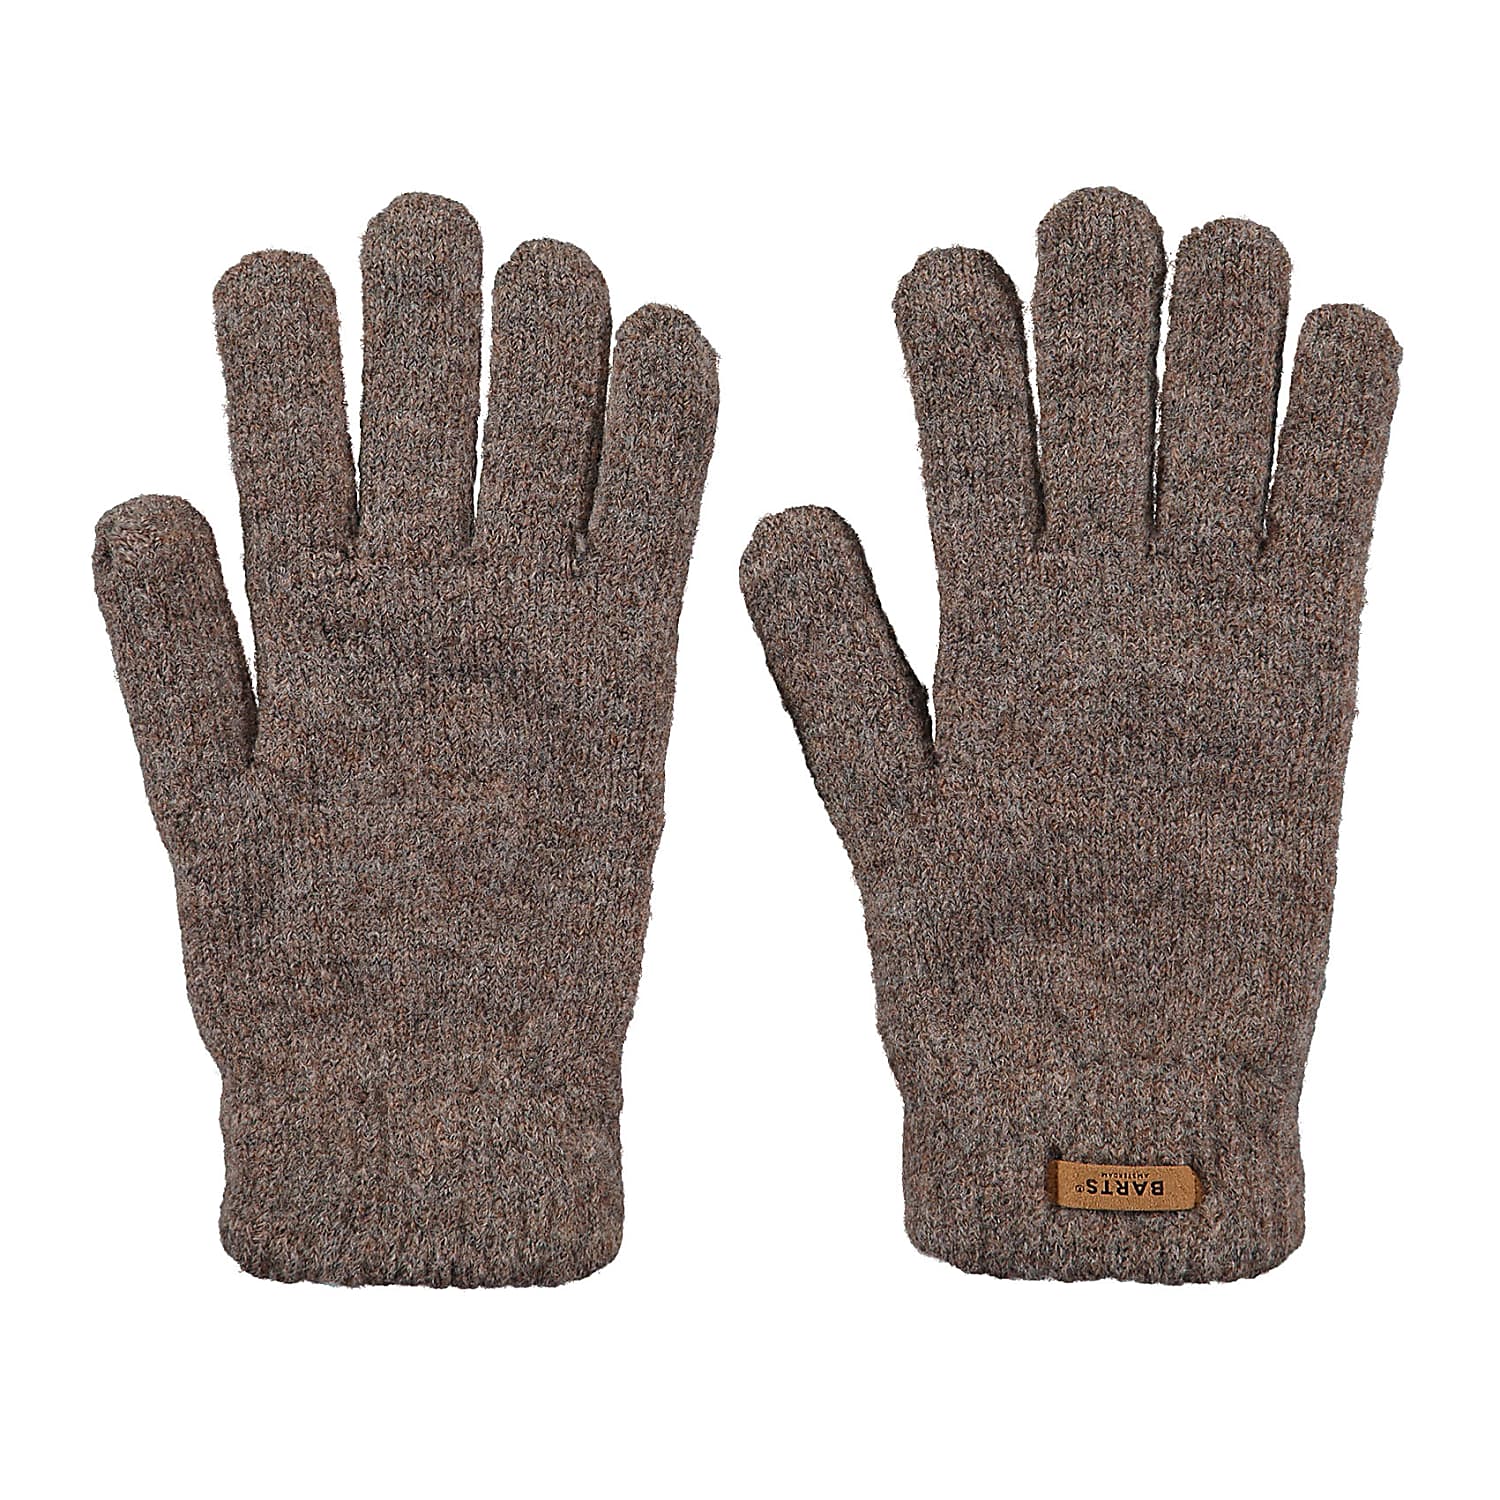 Fast WITZIA shipping Barts cheap and GLOVES, W Brown -